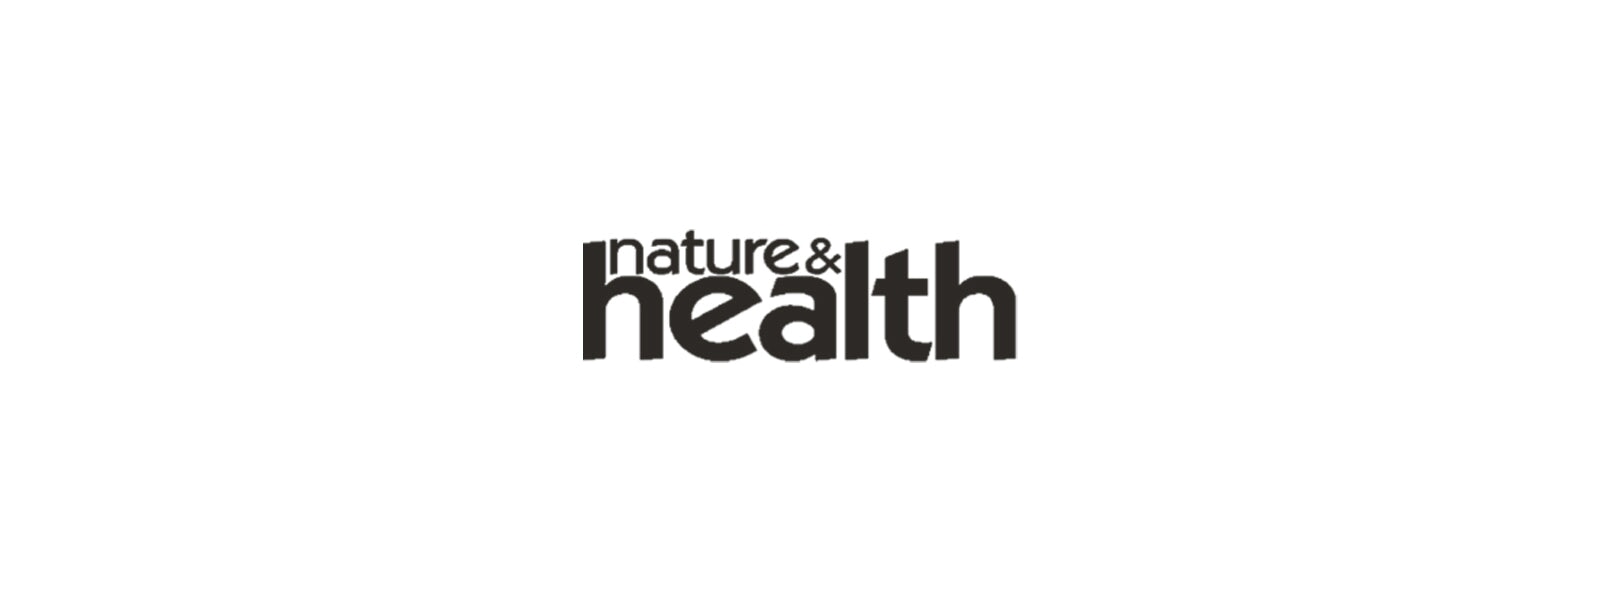 Nature and Health - Toxic Cocktail?